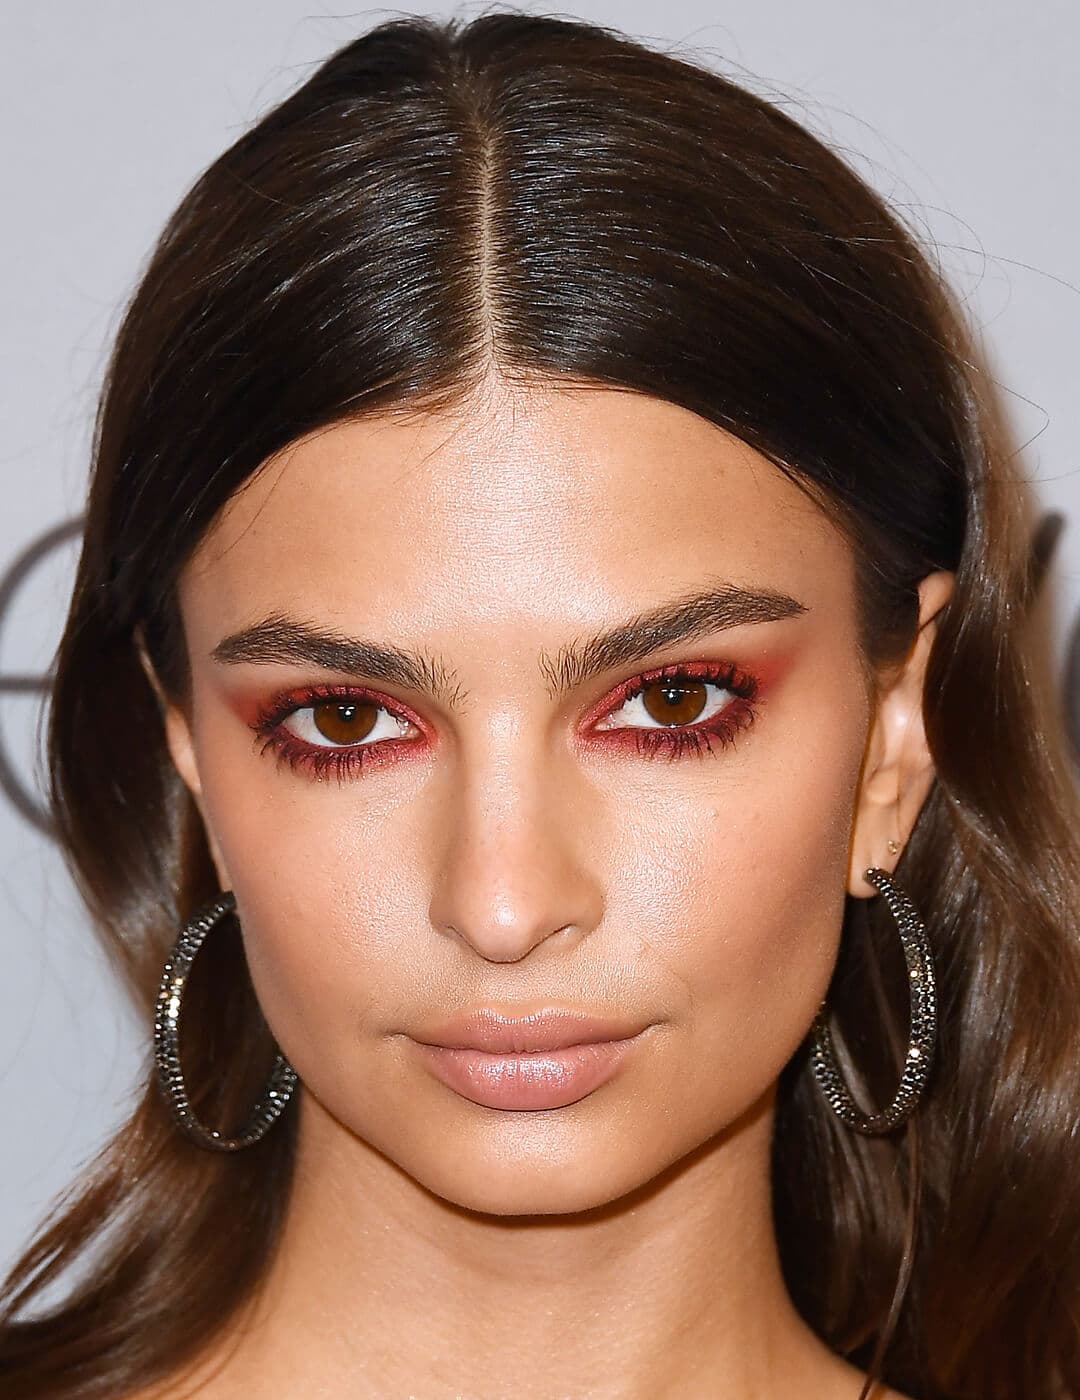 Close-up of Emily Ratajkowski rocking a red eye makeup look and black hoop earrings